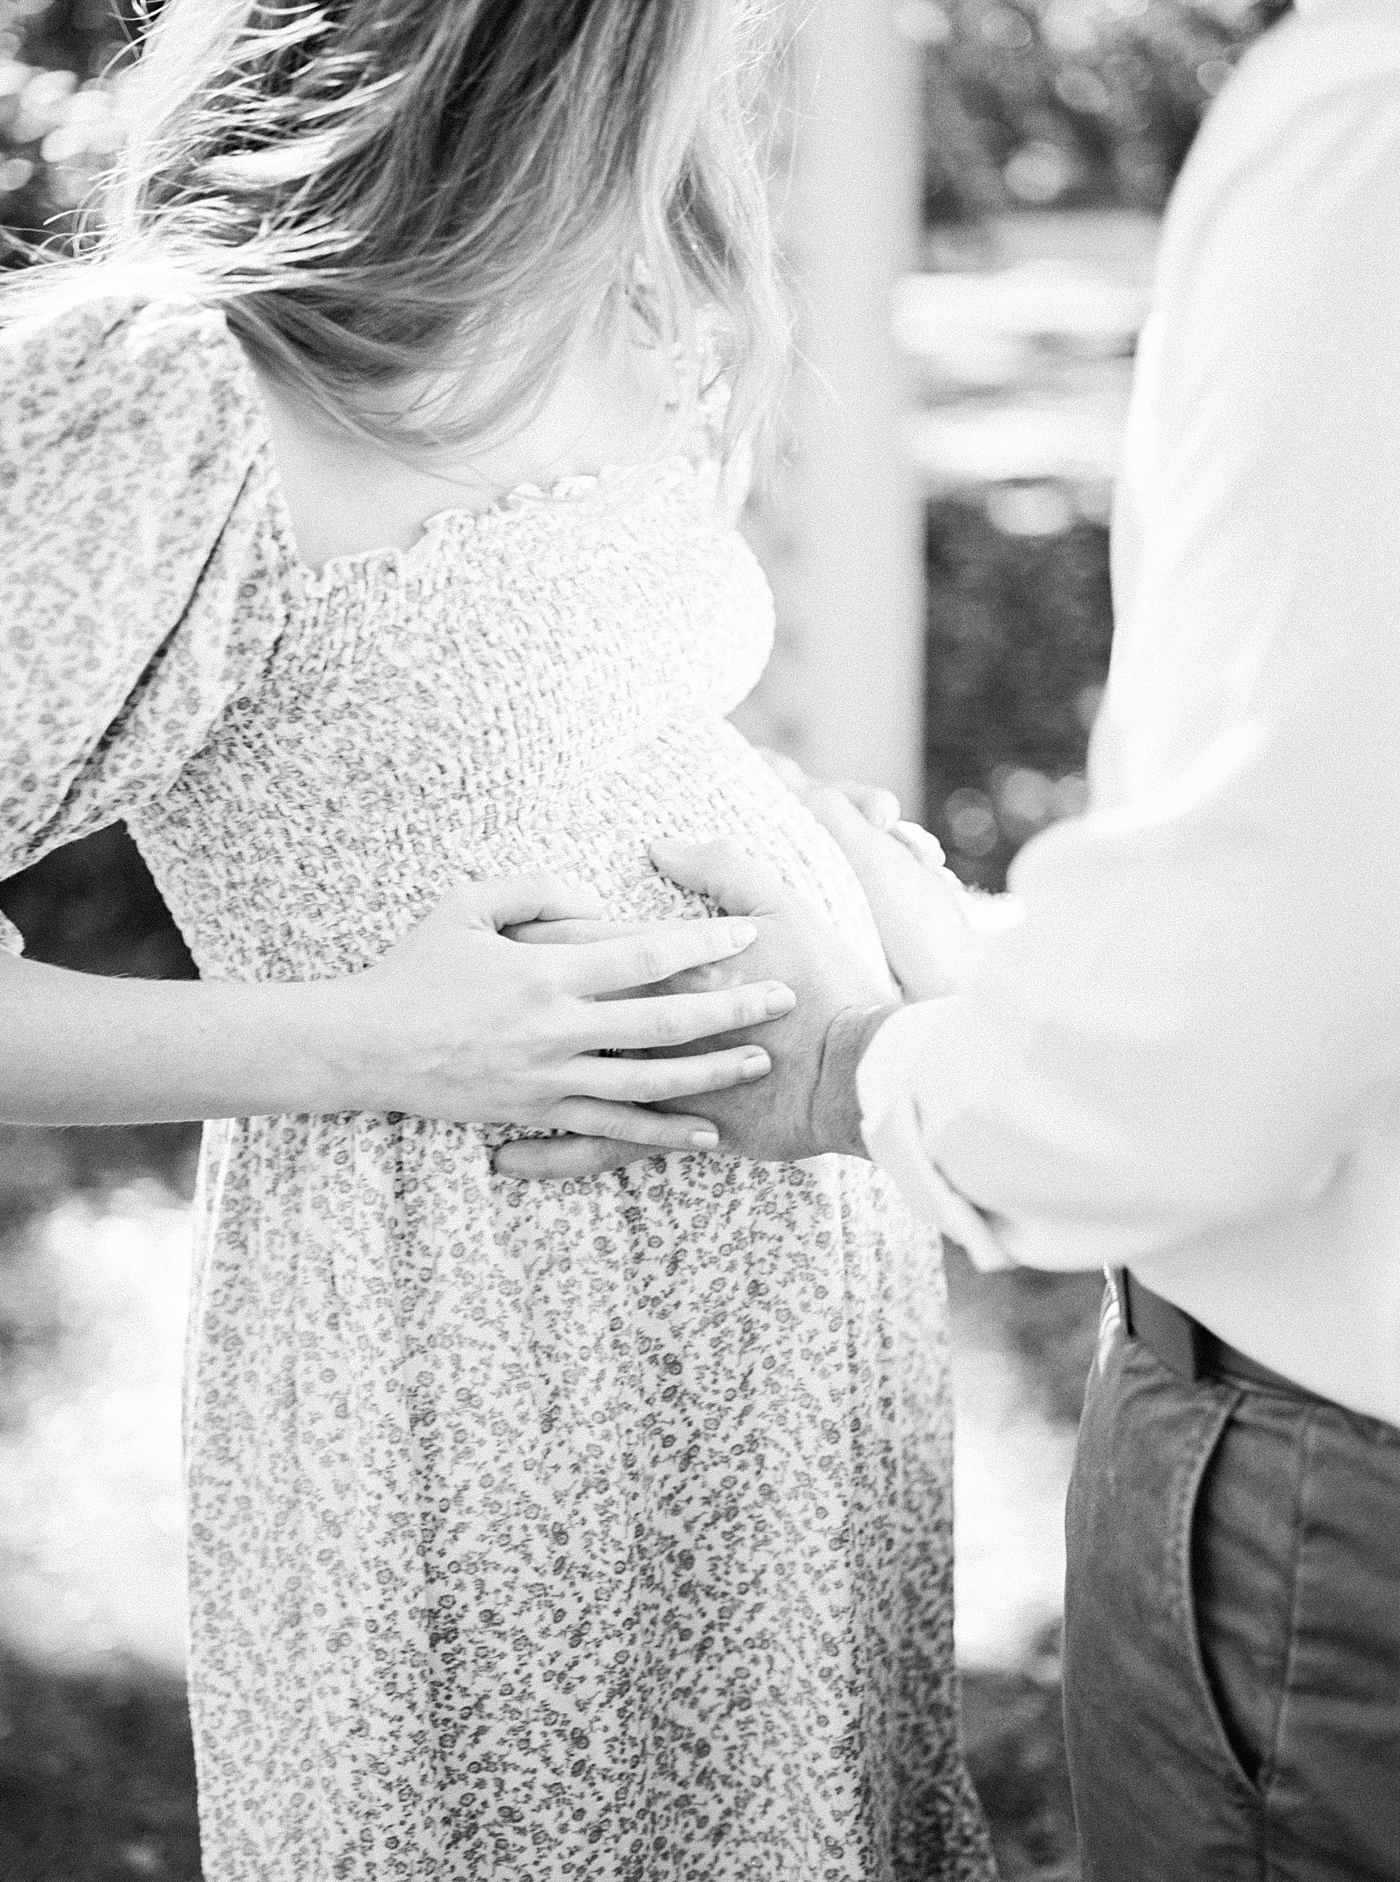 Black-and-white close up image of husband and wife in a spring dress holding her pregnant belly on an oak tree-lined walkway | Image by Caitlyn Motycka Photography